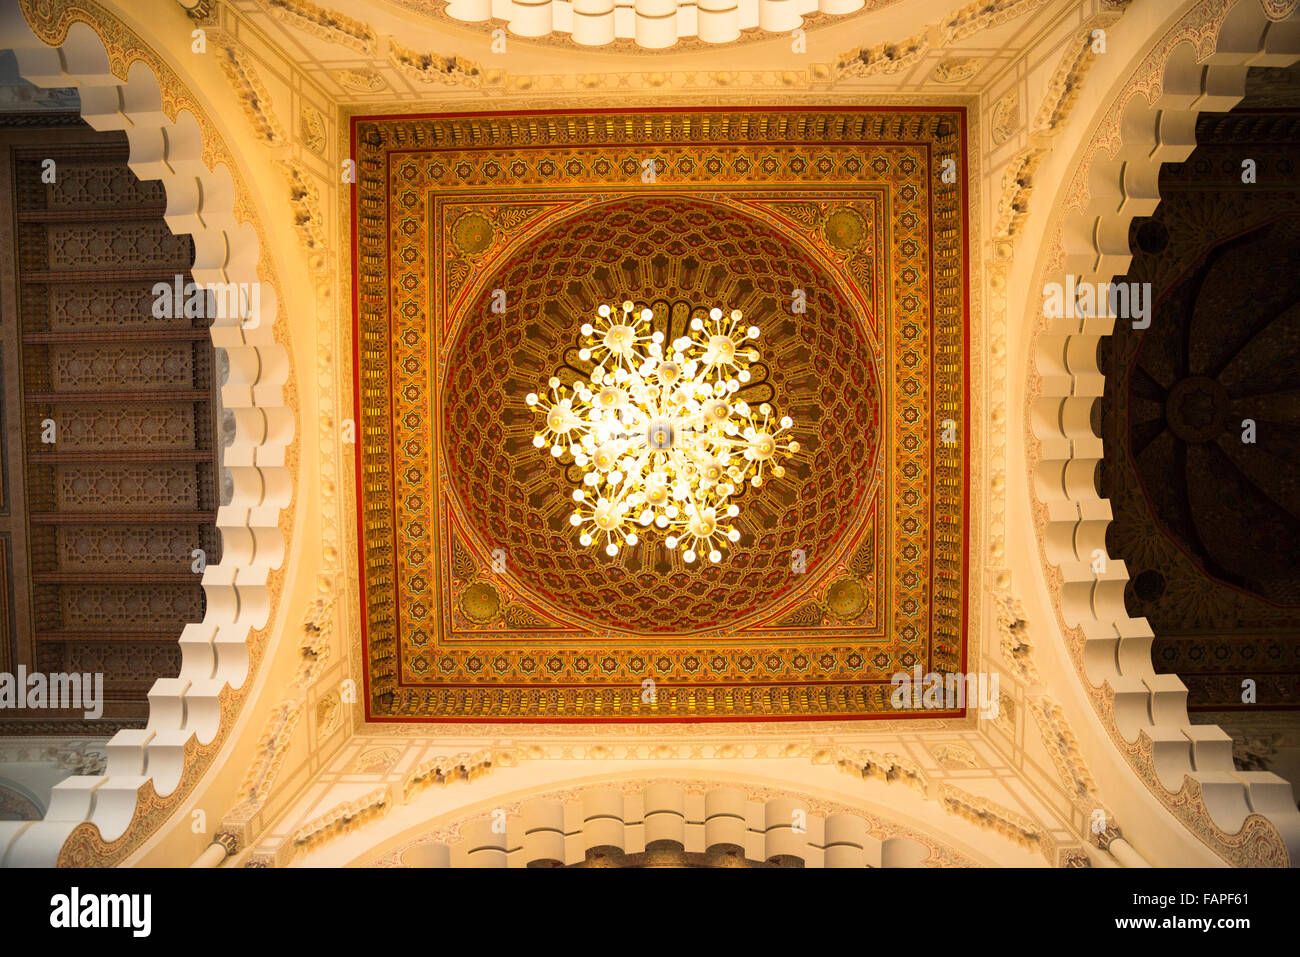 Decorated Ceilling in The Hassan II Mosque or Grande Mosquée Hassan II, Casablanca, Morocco Stock Photo